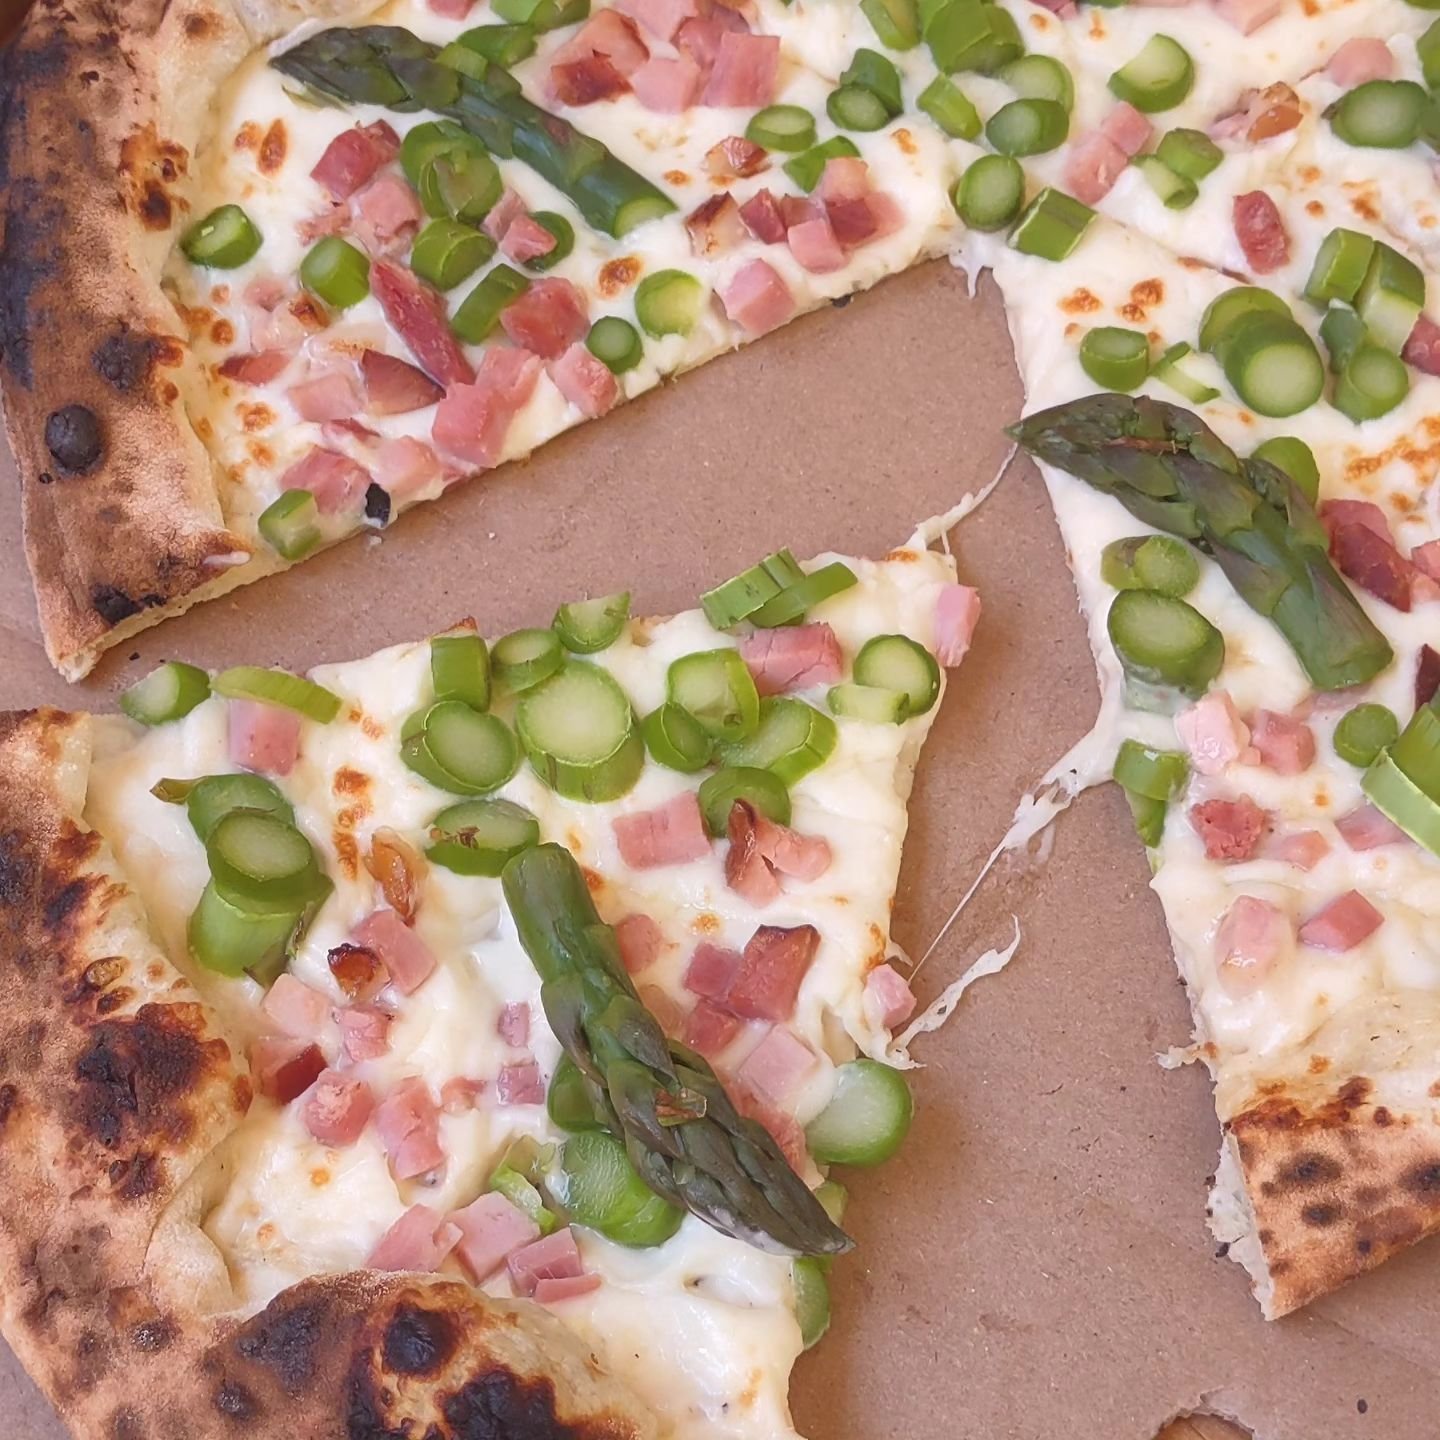 Did you try our pizza special yet? 🤤 Beautiful asparagus from @the_MajesticGardens with ham on creamy roasted garlic sauce

Today you will find us bright and early at the Kingston Farmers Market @kfmnb from 8am till 1pm 🌞

#asparagus #asparagusseas